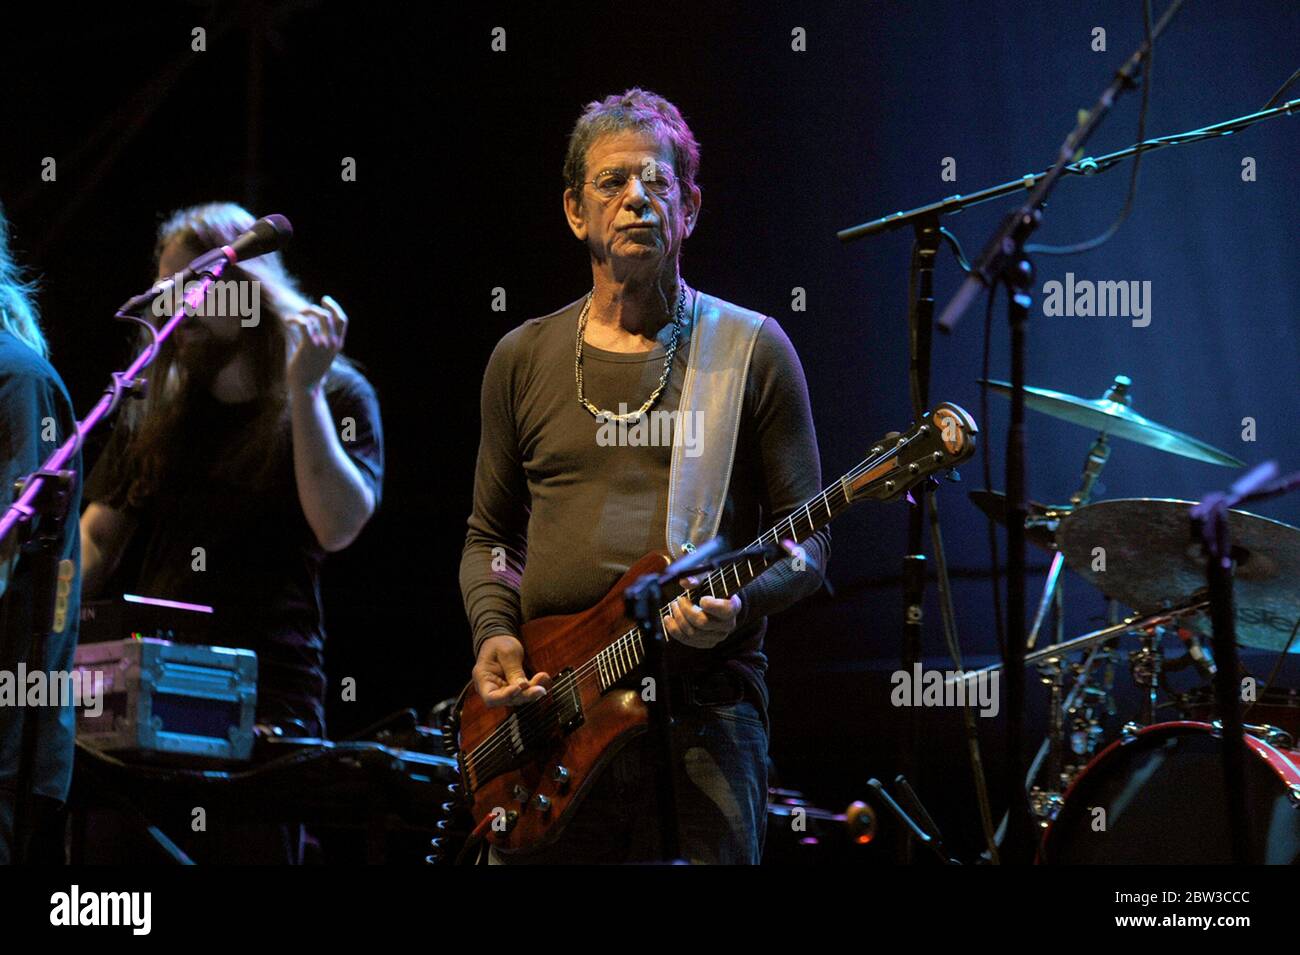 Mailand Italien 07/08/2011: Lou Reed in der Arena Civica Stockfoto